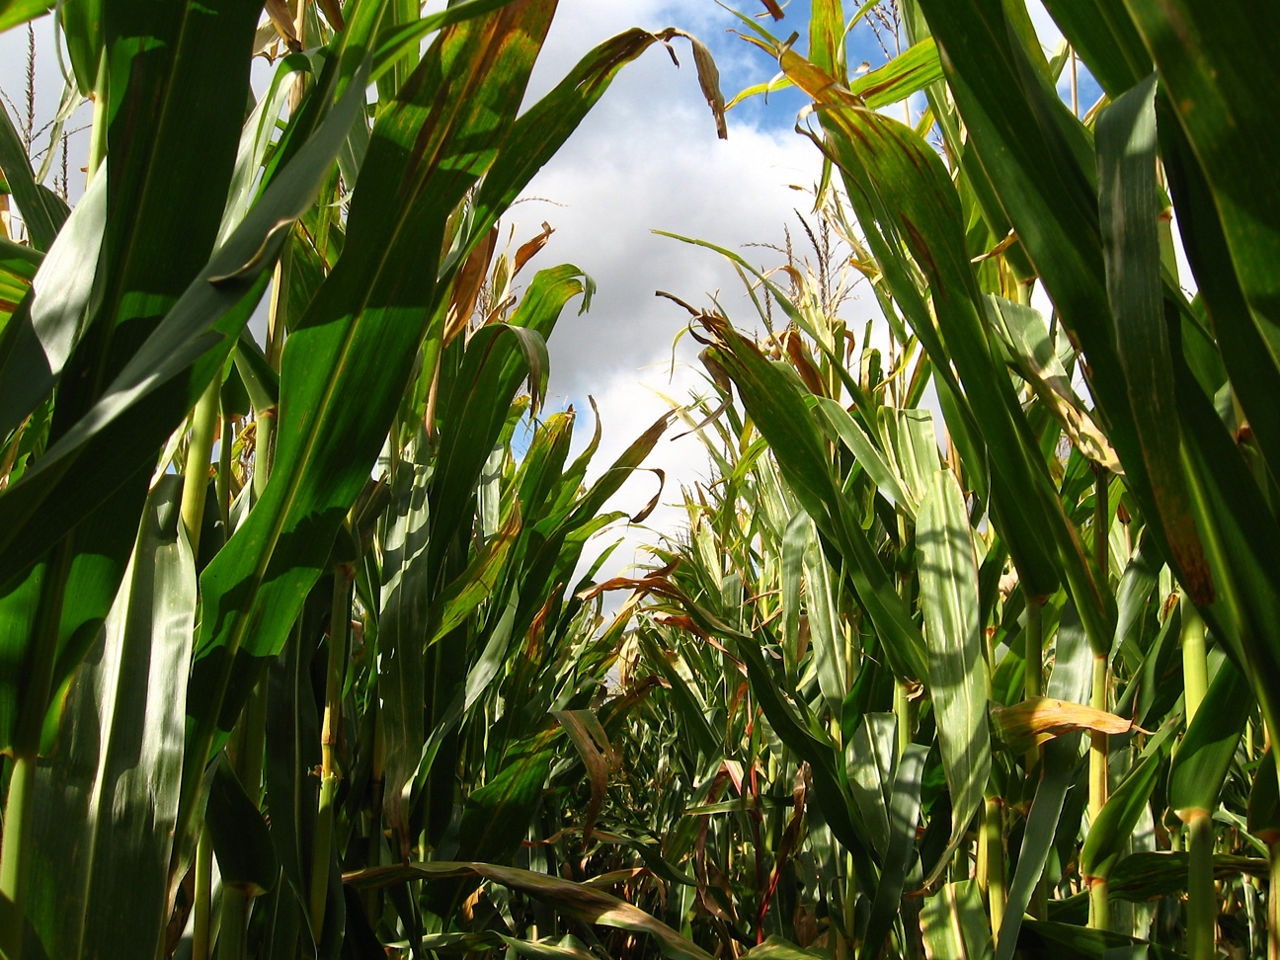 Corn infected with northern corn leaf blight at a disease severity rating of 5